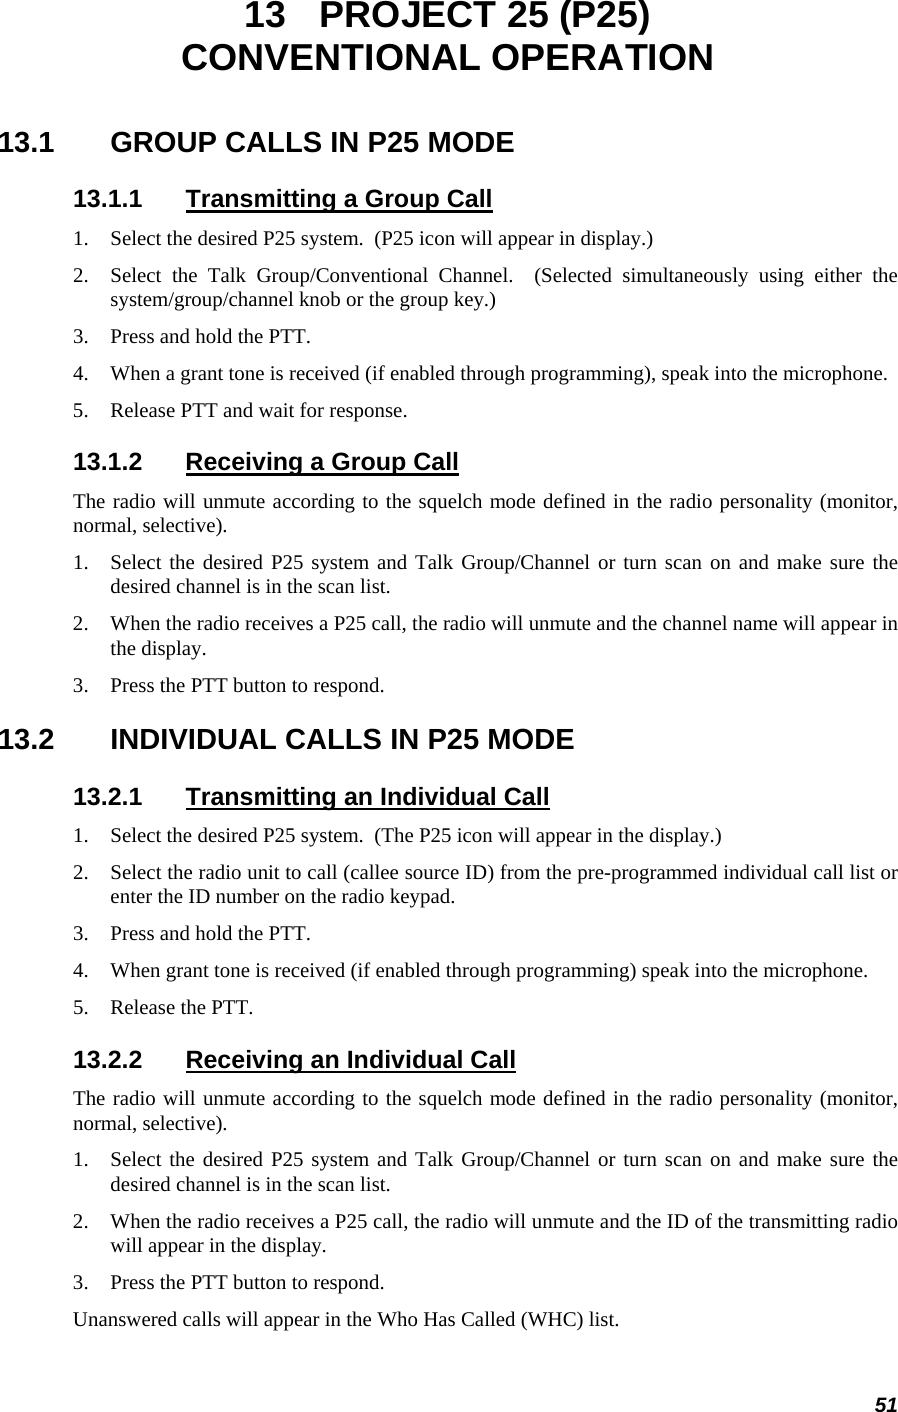 51 13  PROJECT 25 (P25) CONVENTIONAL OPERATION 13.1  GROUP CALLS IN P25 MODE 13.1.1  Transmitting a Group Call 1. Select the desired P25 system.  (P25 icon will appear in display.) 2. Select the Talk Group/Conventional Channel.  (Selected simultaneously using either the system/group/channel knob or the group key.) 3. Press and hold the PTT. 4. When a grant tone is received (if enabled through programming), speak into the microphone. 5. Release PTT and wait for response. 13.1.2  Receiving a Group Call The radio will unmute according to the squelch mode defined in the radio personality (monitor, normal, selective). 1. Select the desired P25 system and Talk Group/Channel or turn scan on and make sure the desired channel is in the scan list. 2. When the radio receives a P25 call, the radio will unmute and the channel name will appear in the display. 3. Press the PTT button to respond. 13.2  INDIVIDUAL CALLS IN P25 MODE 13.2.1  Transmitting an Individual Call 1. Select the desired P25 system.  (The P25 icon will appear in the display.) 2. Select the radio unit to call (callee source ID) from the pre-programmed individual call list or enter the ID number on the radio keypad. 3. Press and hold the PTT. 4. When grant tone is received (if enabled through programming) speak into the microphone. 5. Release the PTT. 13.2.2  Receiving an Individual Call The radio will unmute according to the squelch mode defined in the radio personality (monitor, normal, selective). 1. Select the desired P25 system and Talk Group/Channel or turn scan on and make sure the desired channel is in the scan list. 2. When the radio receives a P25 call, the radio will unmute and the ID of the transmitting radio will appear in the display. 3. Press the PTT button to respond. Unanswered calls will appear in the Who Has Called (WHC) list. 